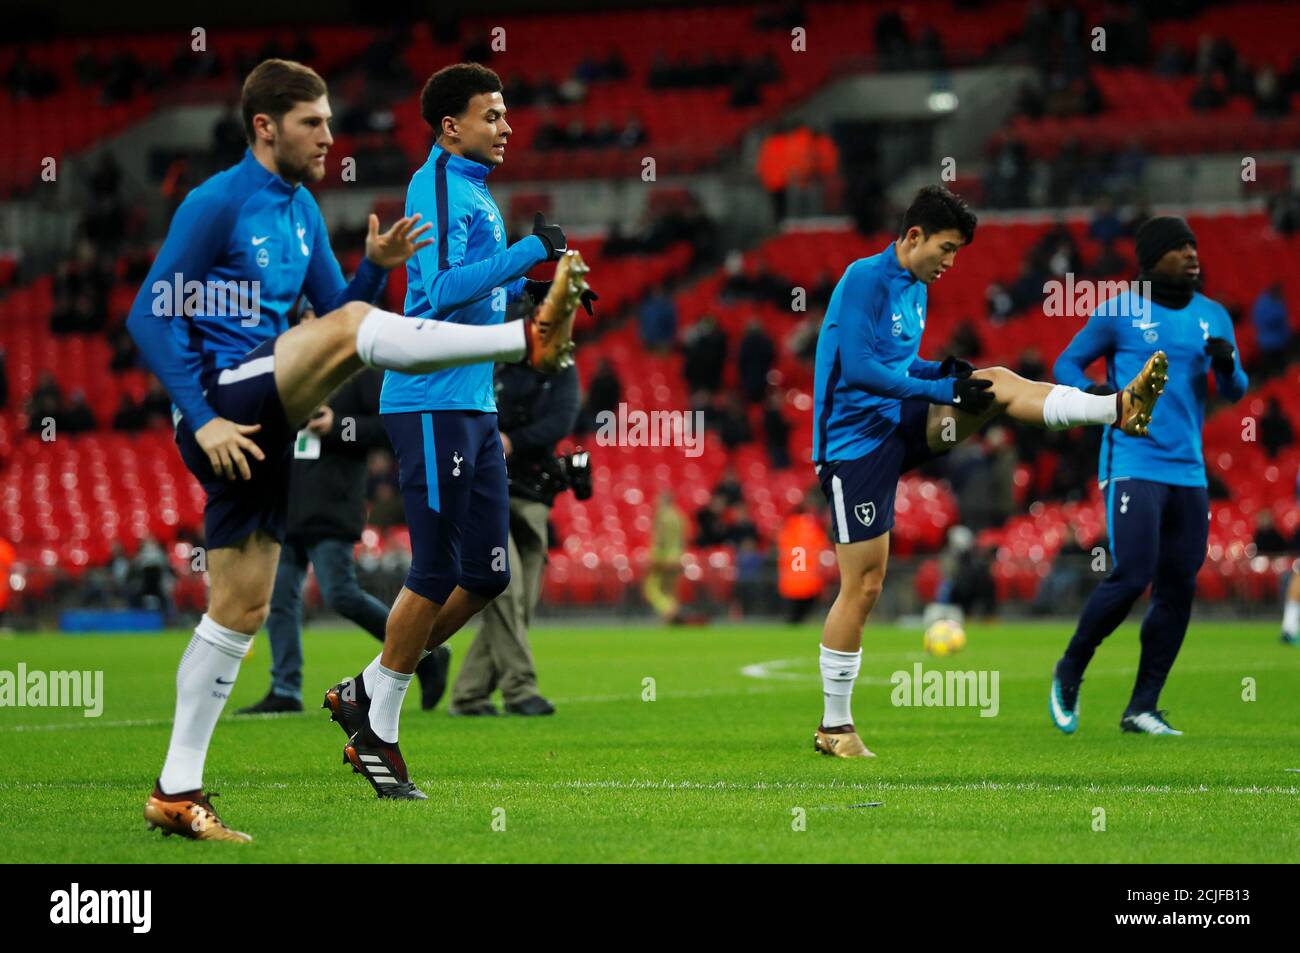 Soccer Football - Premier League - Tottenham Hotspur vs West Ham United - Wembley Stadium, London, Britain - January 4, 2018   Tottenham's Son Heung-min, Dele Alli and Ben Davies warm up before the match   REUTERS/Eddie Keogh    EDITORIAL USE ONLY. No use with unauthorized audio, video, data, fixture lists, club/league logos or 'live' services. Online in-match use limited to 75 images, no video emulation. No use in betting, games or single club/league/player publications.  Please contact your account representative for further details. Stock Photo